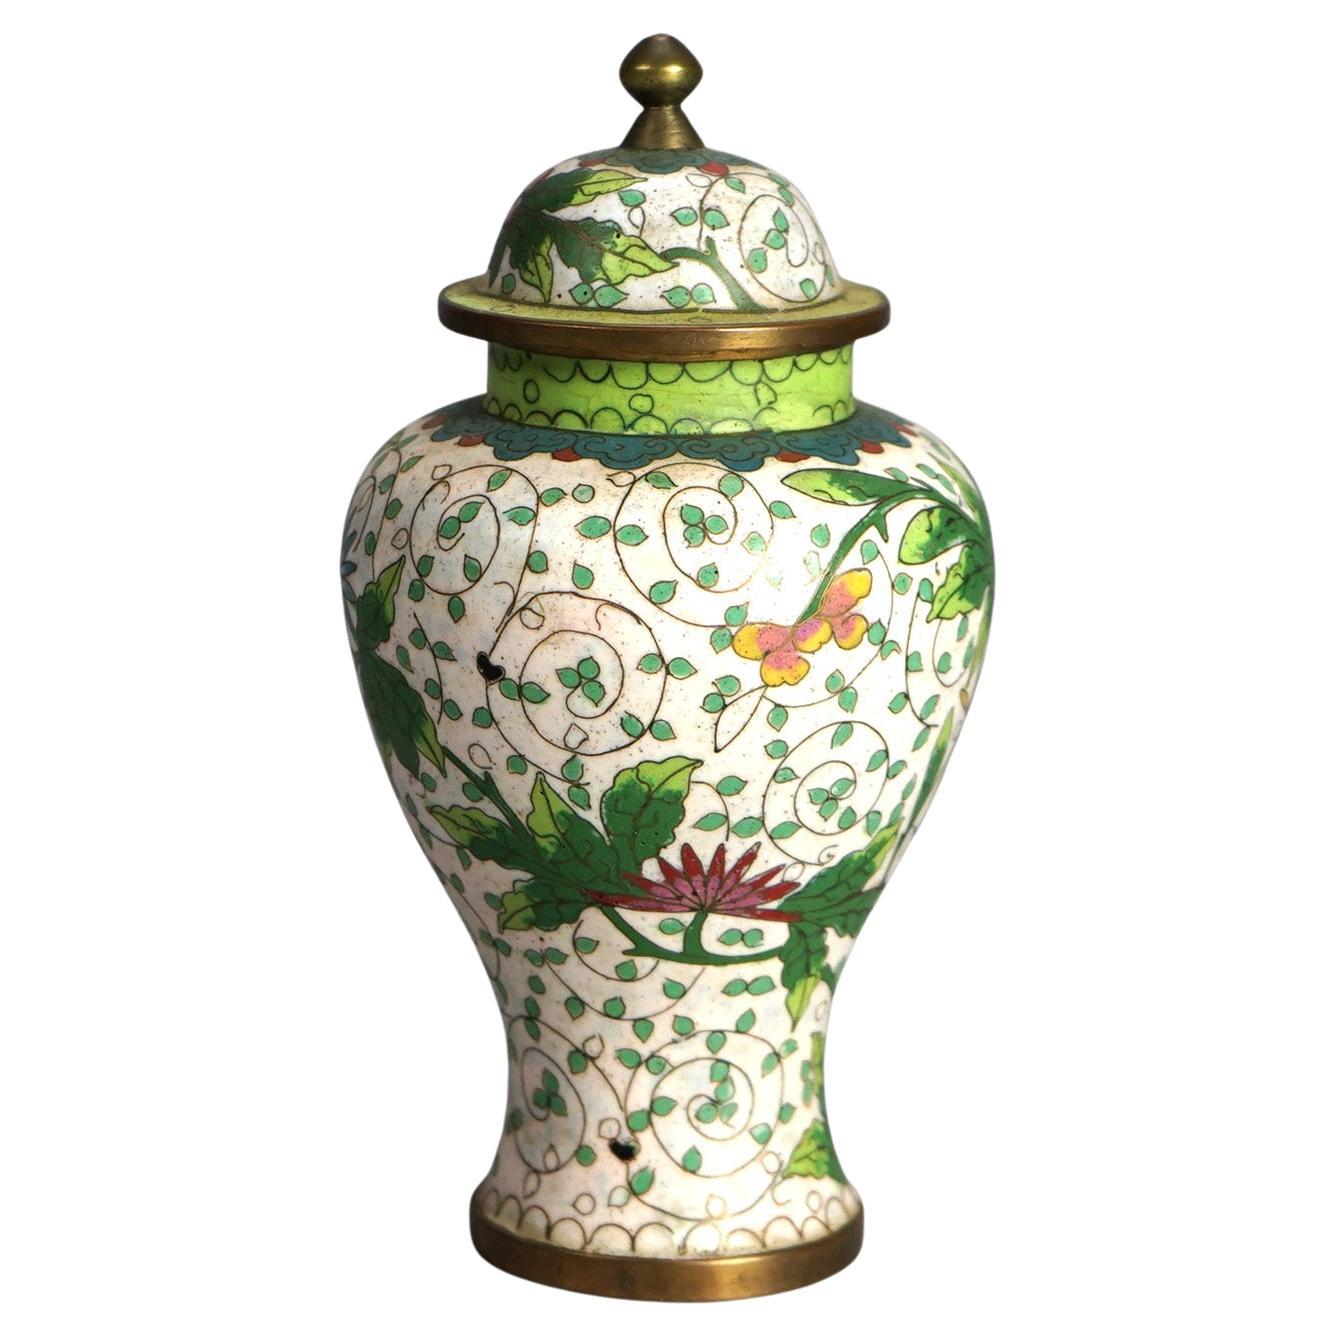 Antique Chinese Bronze Cloisonne Enameled Lidded Urn with Flowers C1920 For Sale